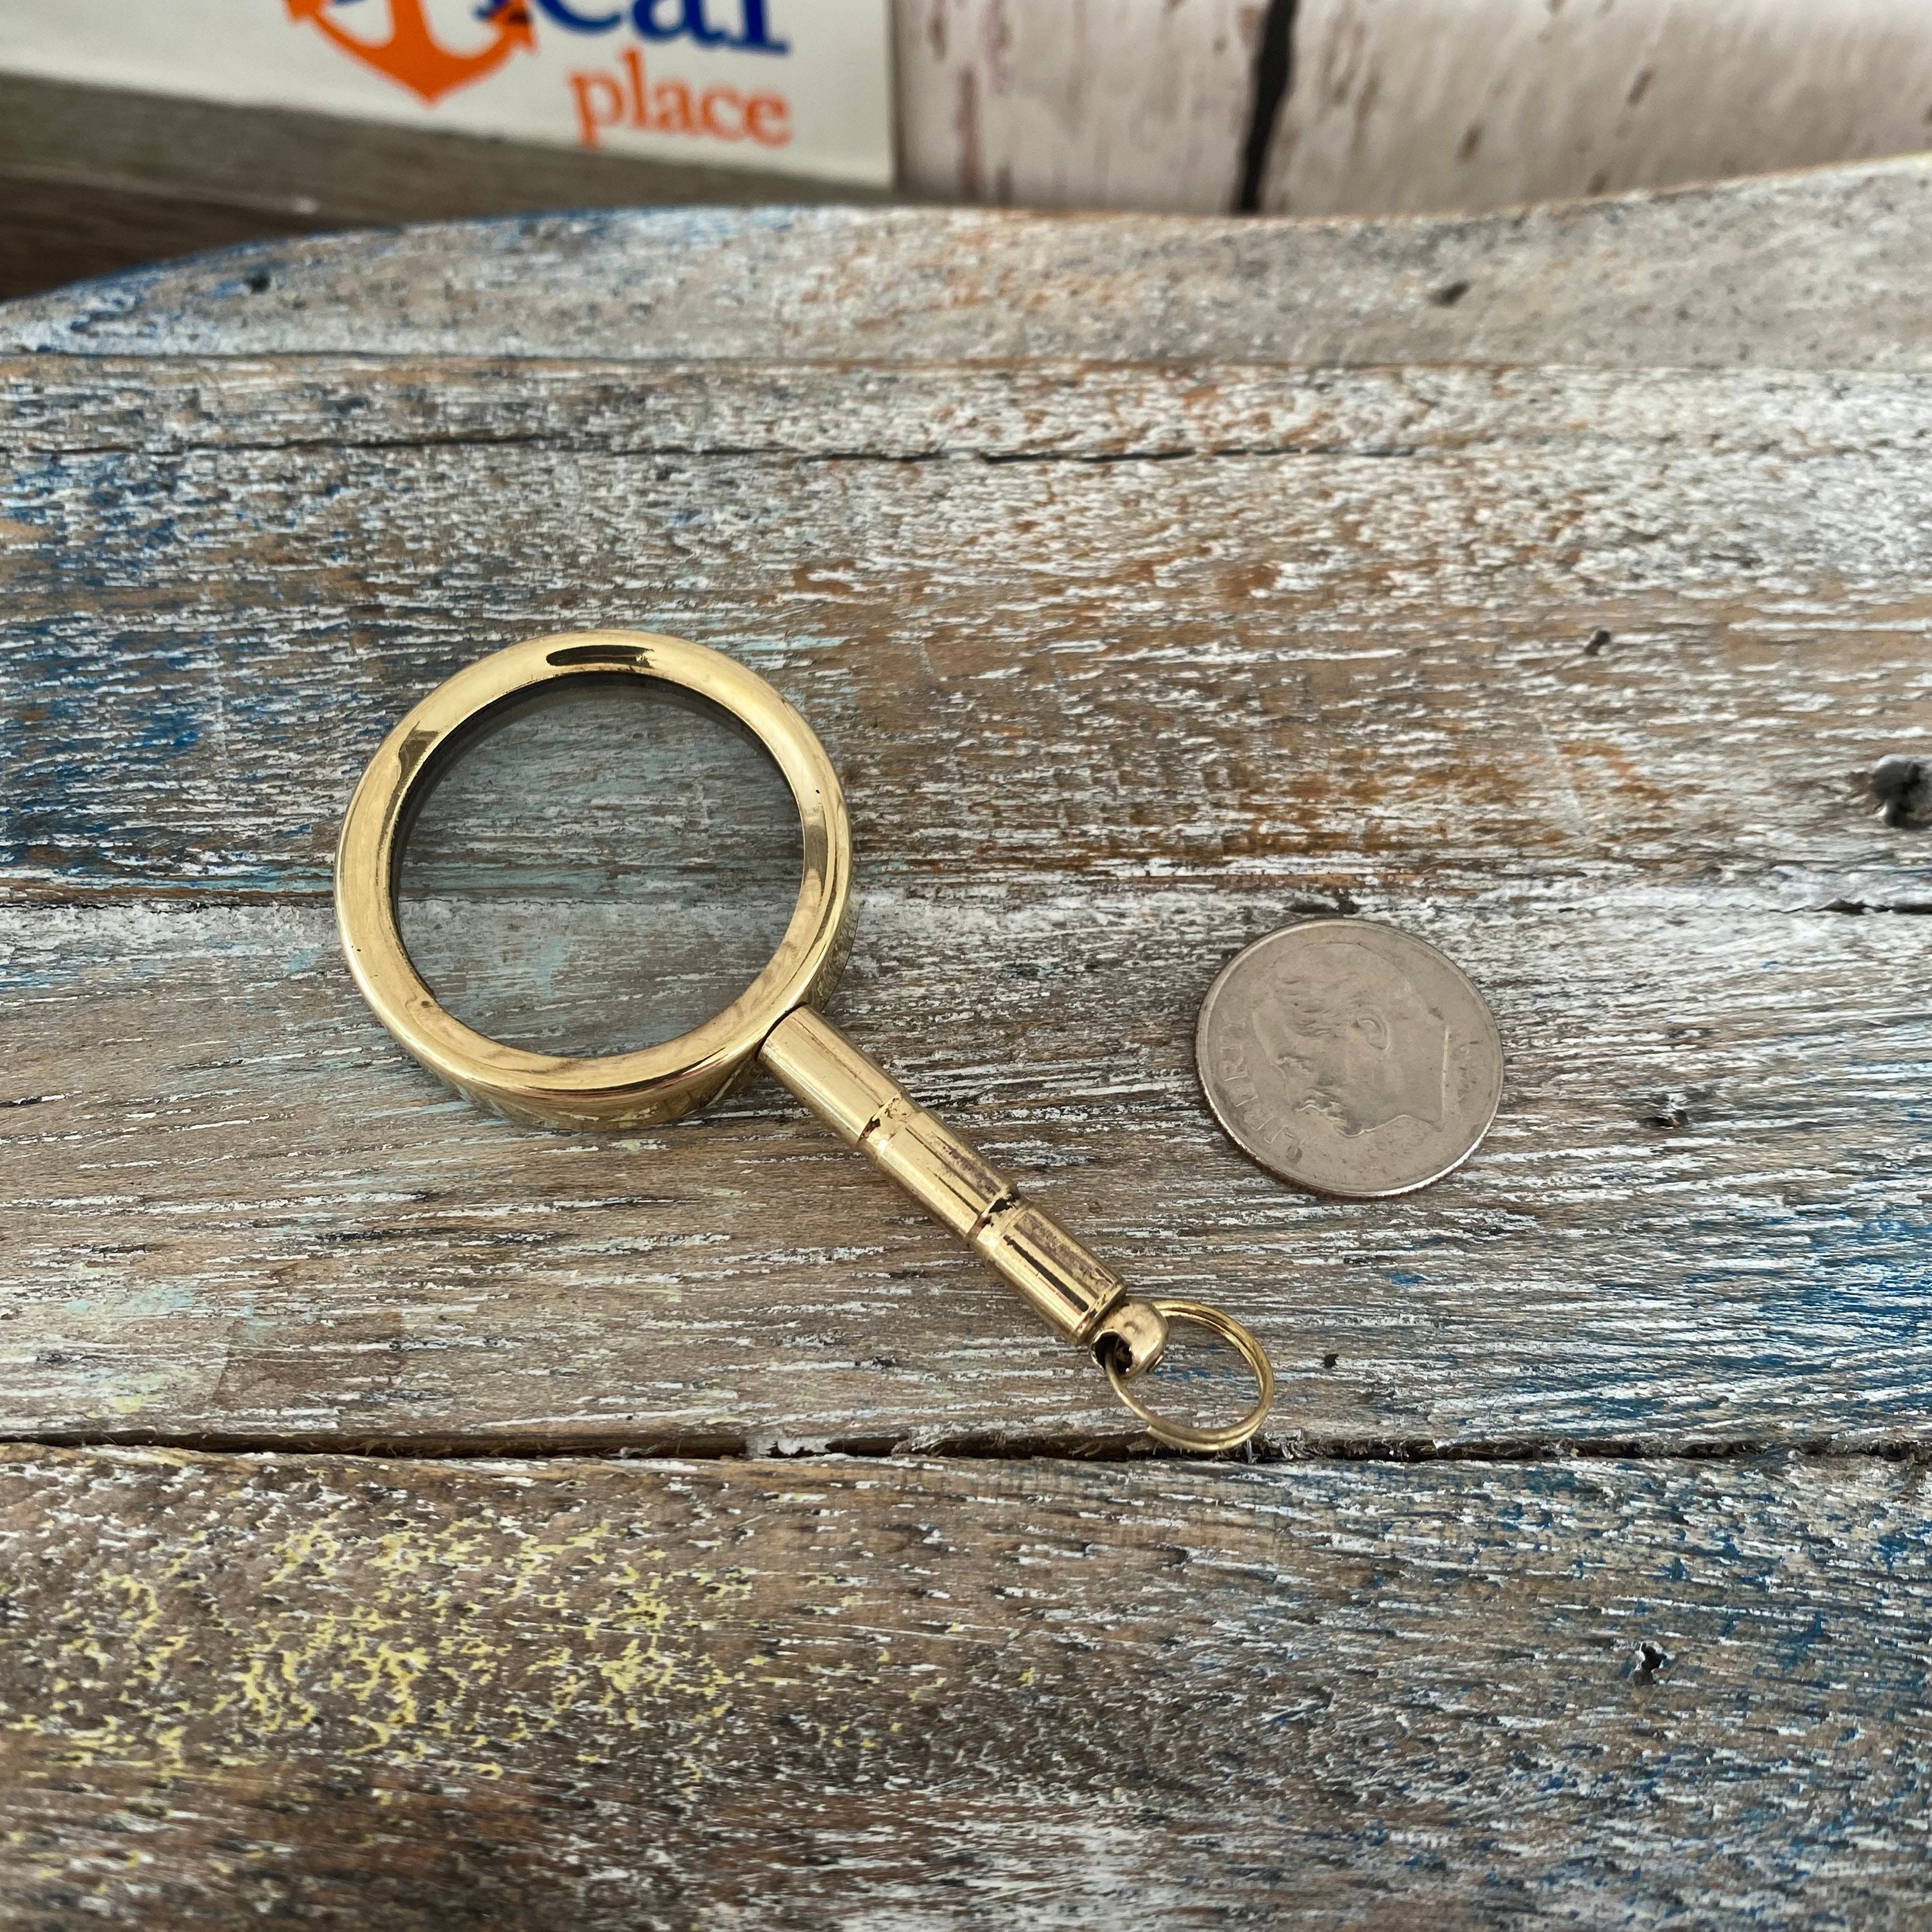 Miniature Magnifying Glass Necklace 1 Lot Brass Mini Magnifier With Chain  gift